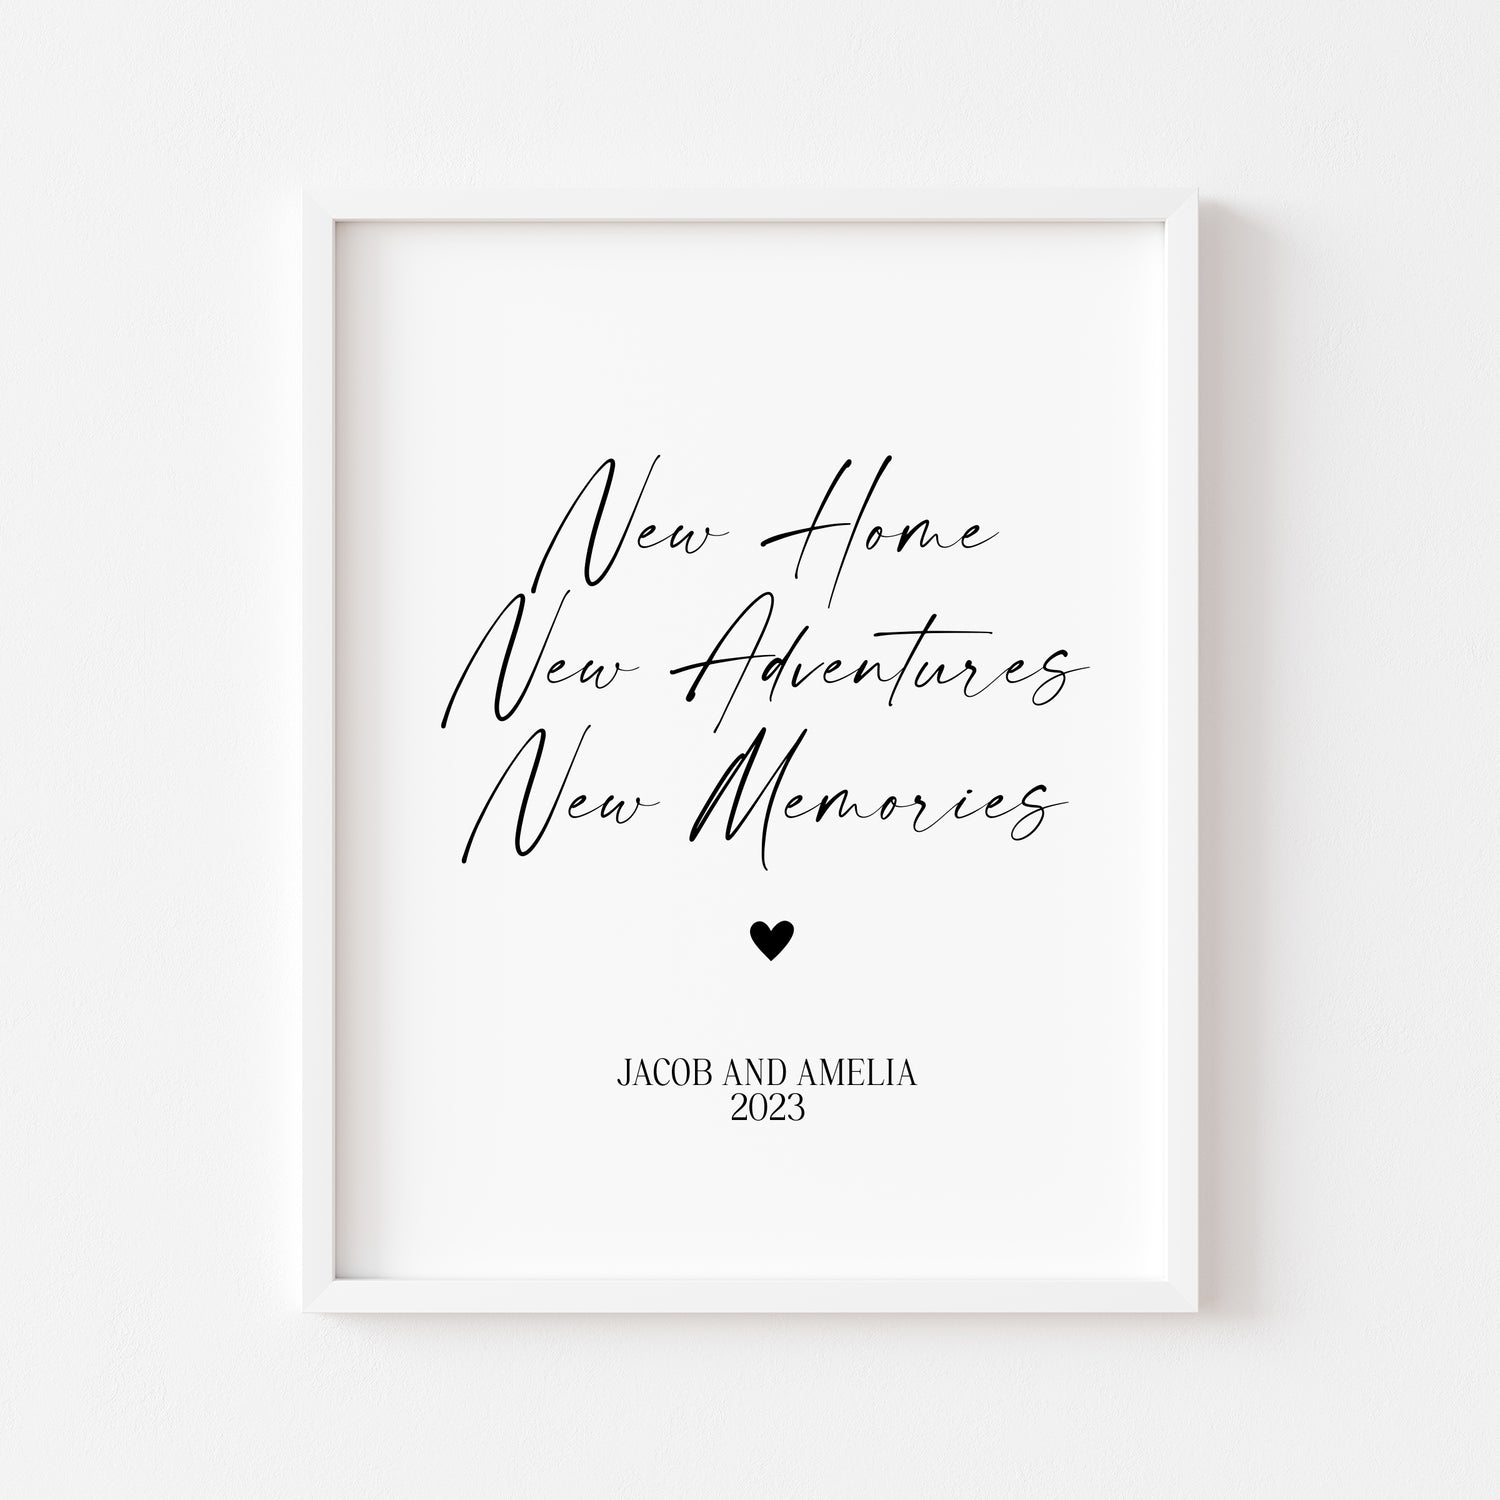 PERSONALISED PRINTS & GIFT IDEAS